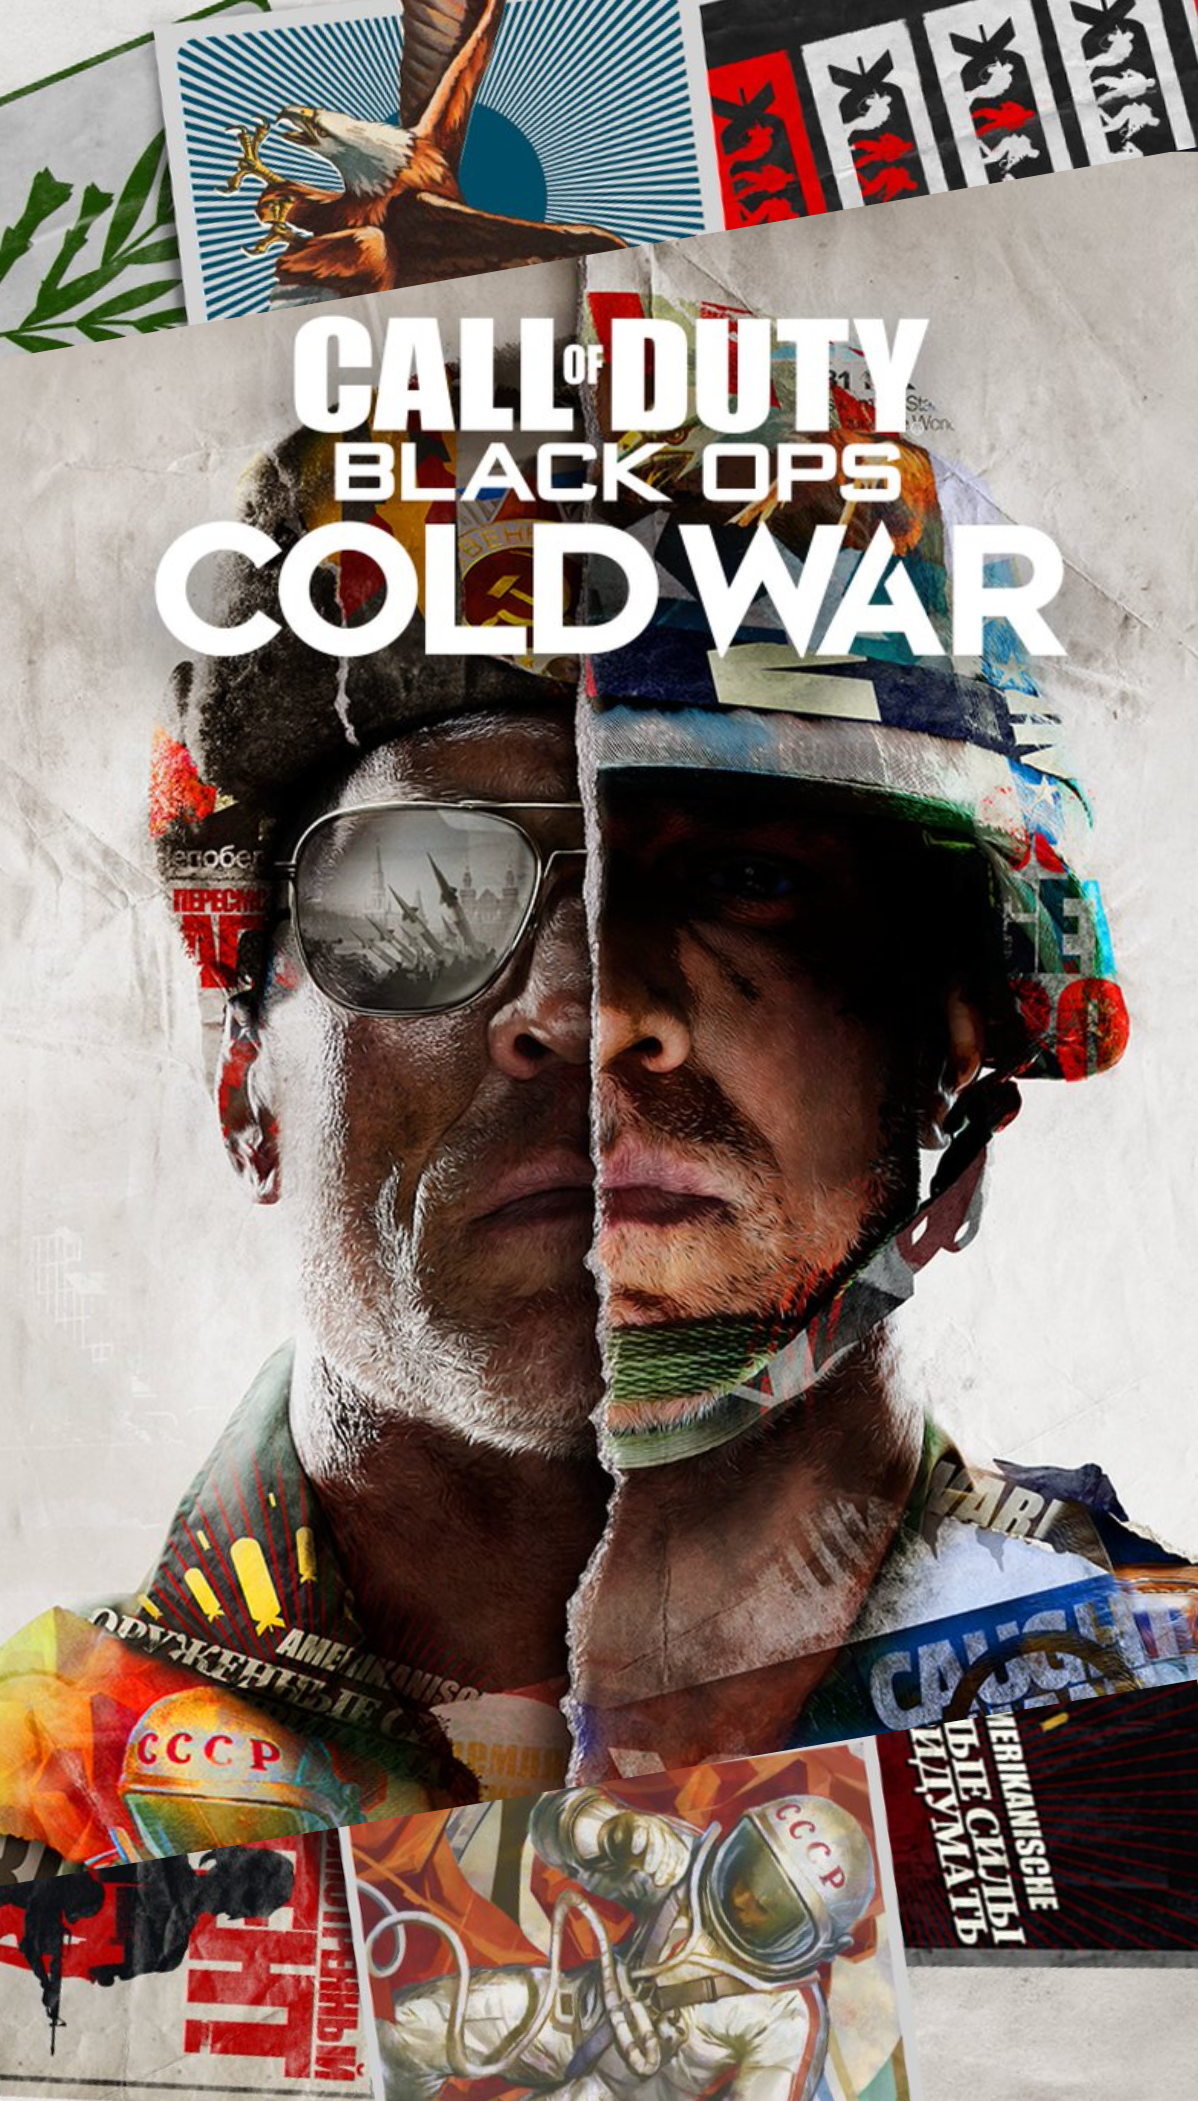 COD] Just made this phone wallpapers For Cold War : blackopscoldwar